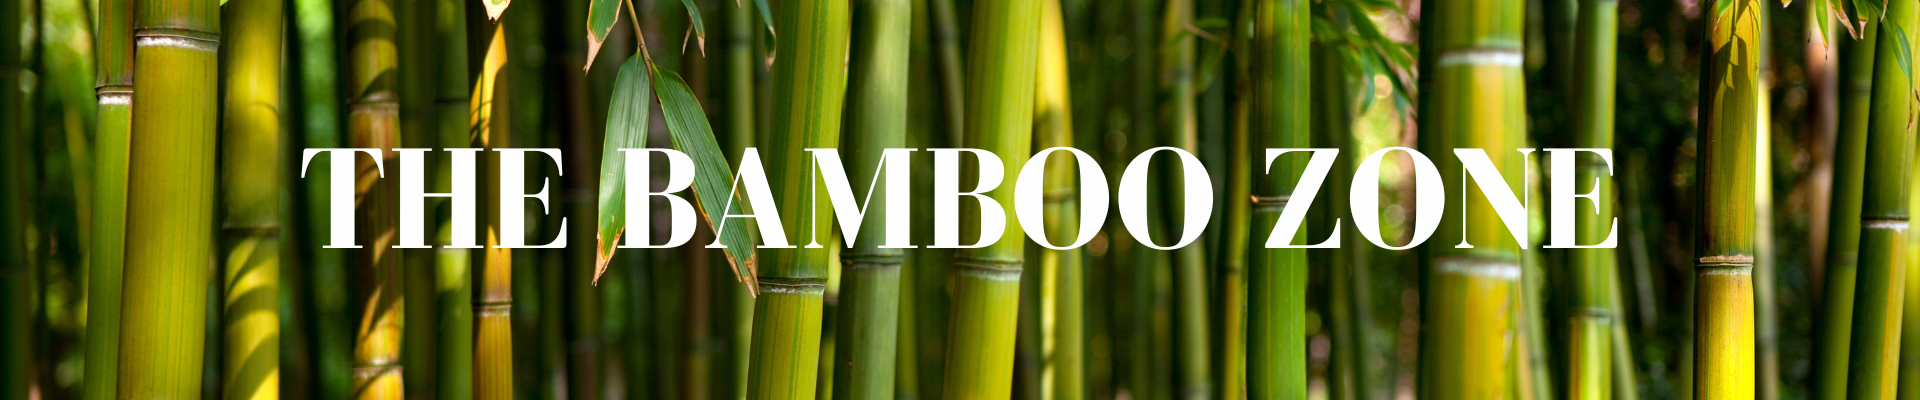 The bamboo zone